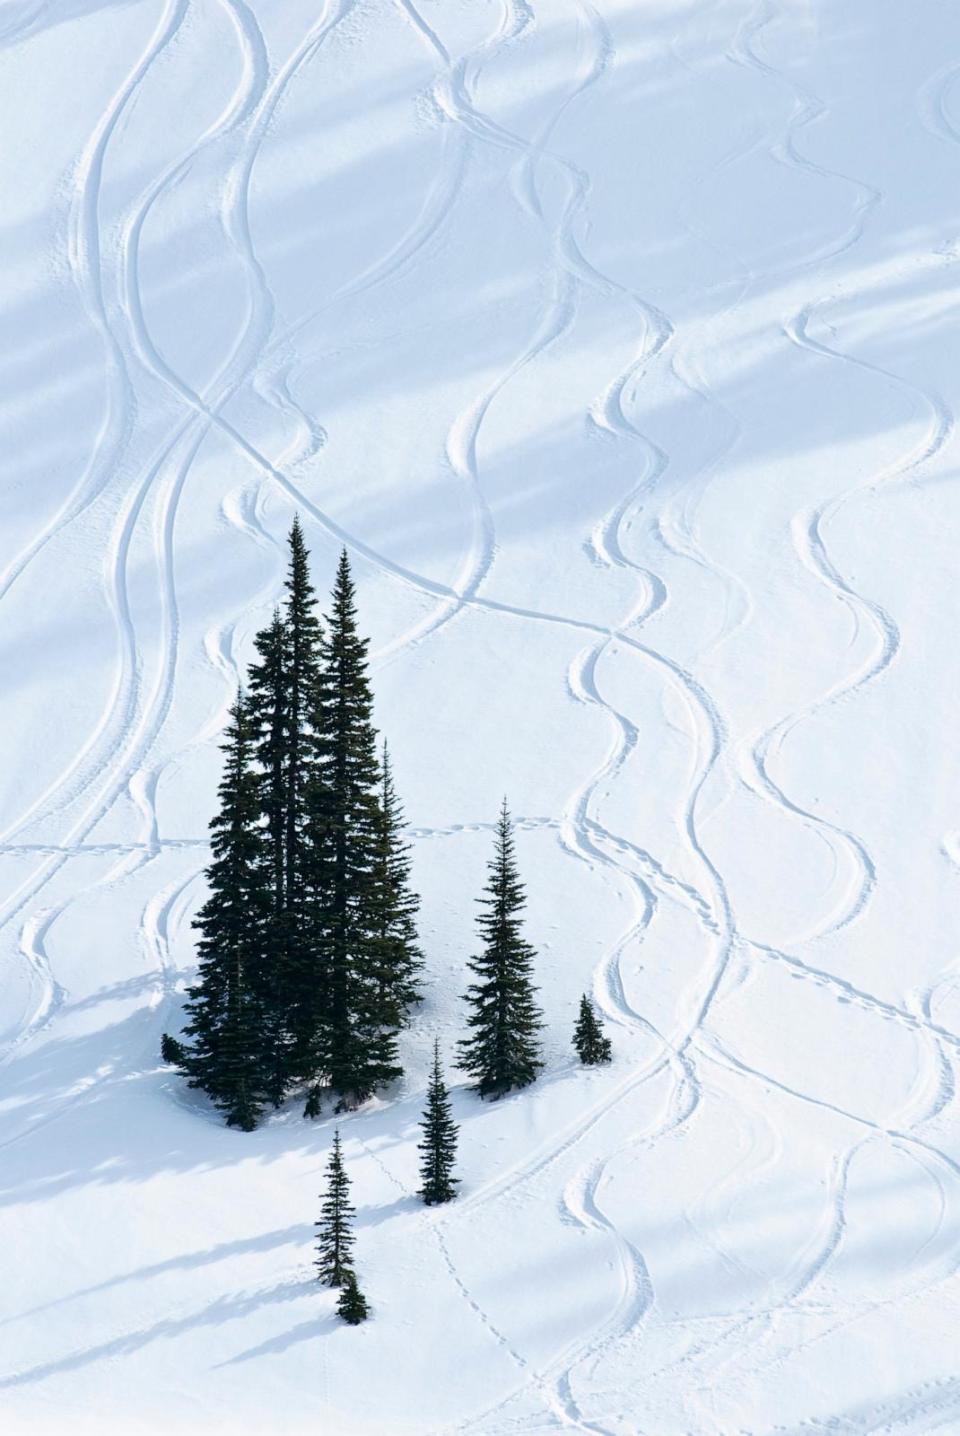 PHOTO: Trees and tracks in snow, Paradise Valley; Mount Rainier National Park, WA.  (Greg Vaughn/Universal Images Group via Getty Images)